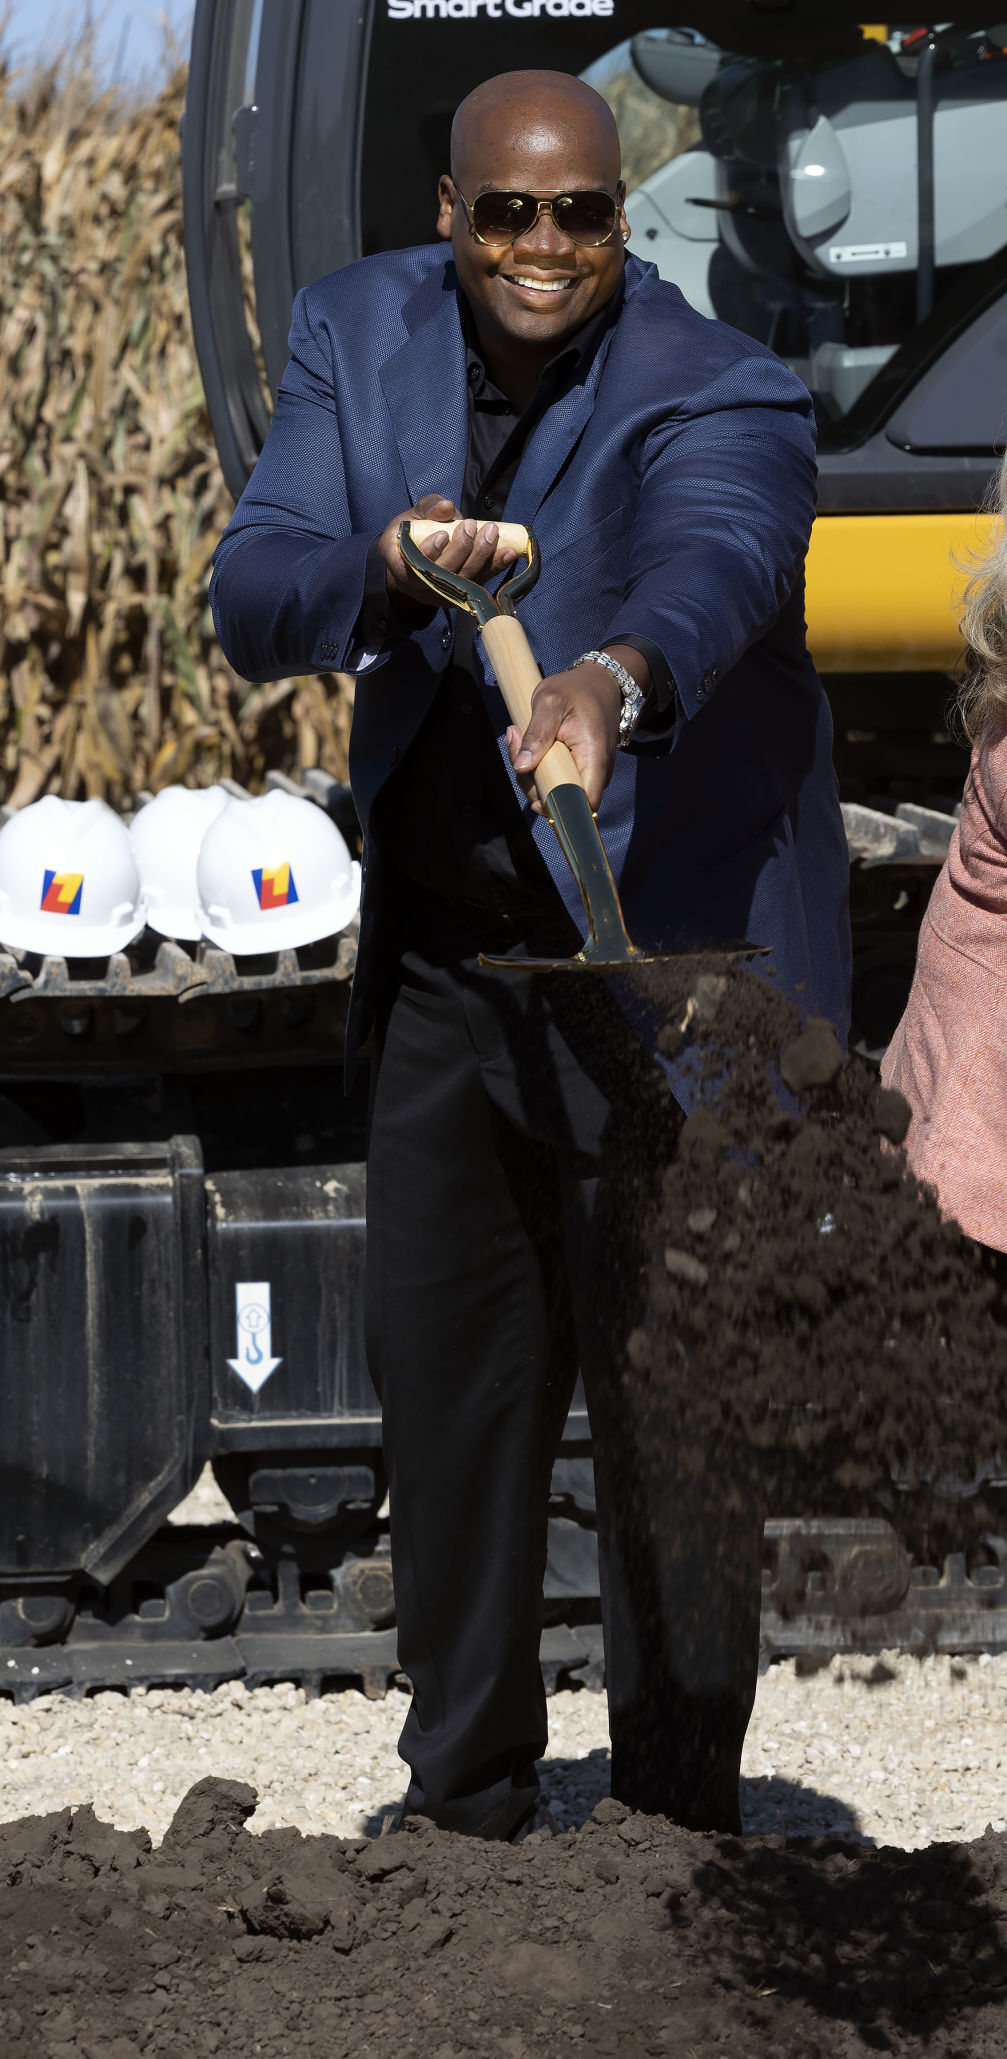 Frank Thomas tosses a shovelful of dirt during the Project Heaven groundbreaking ceremony at the Field of Dreams in Dyersville, Iowa, on Wednesday,Sept. 28, 2022.    PHOTO CREDIT: Stephen Gassman